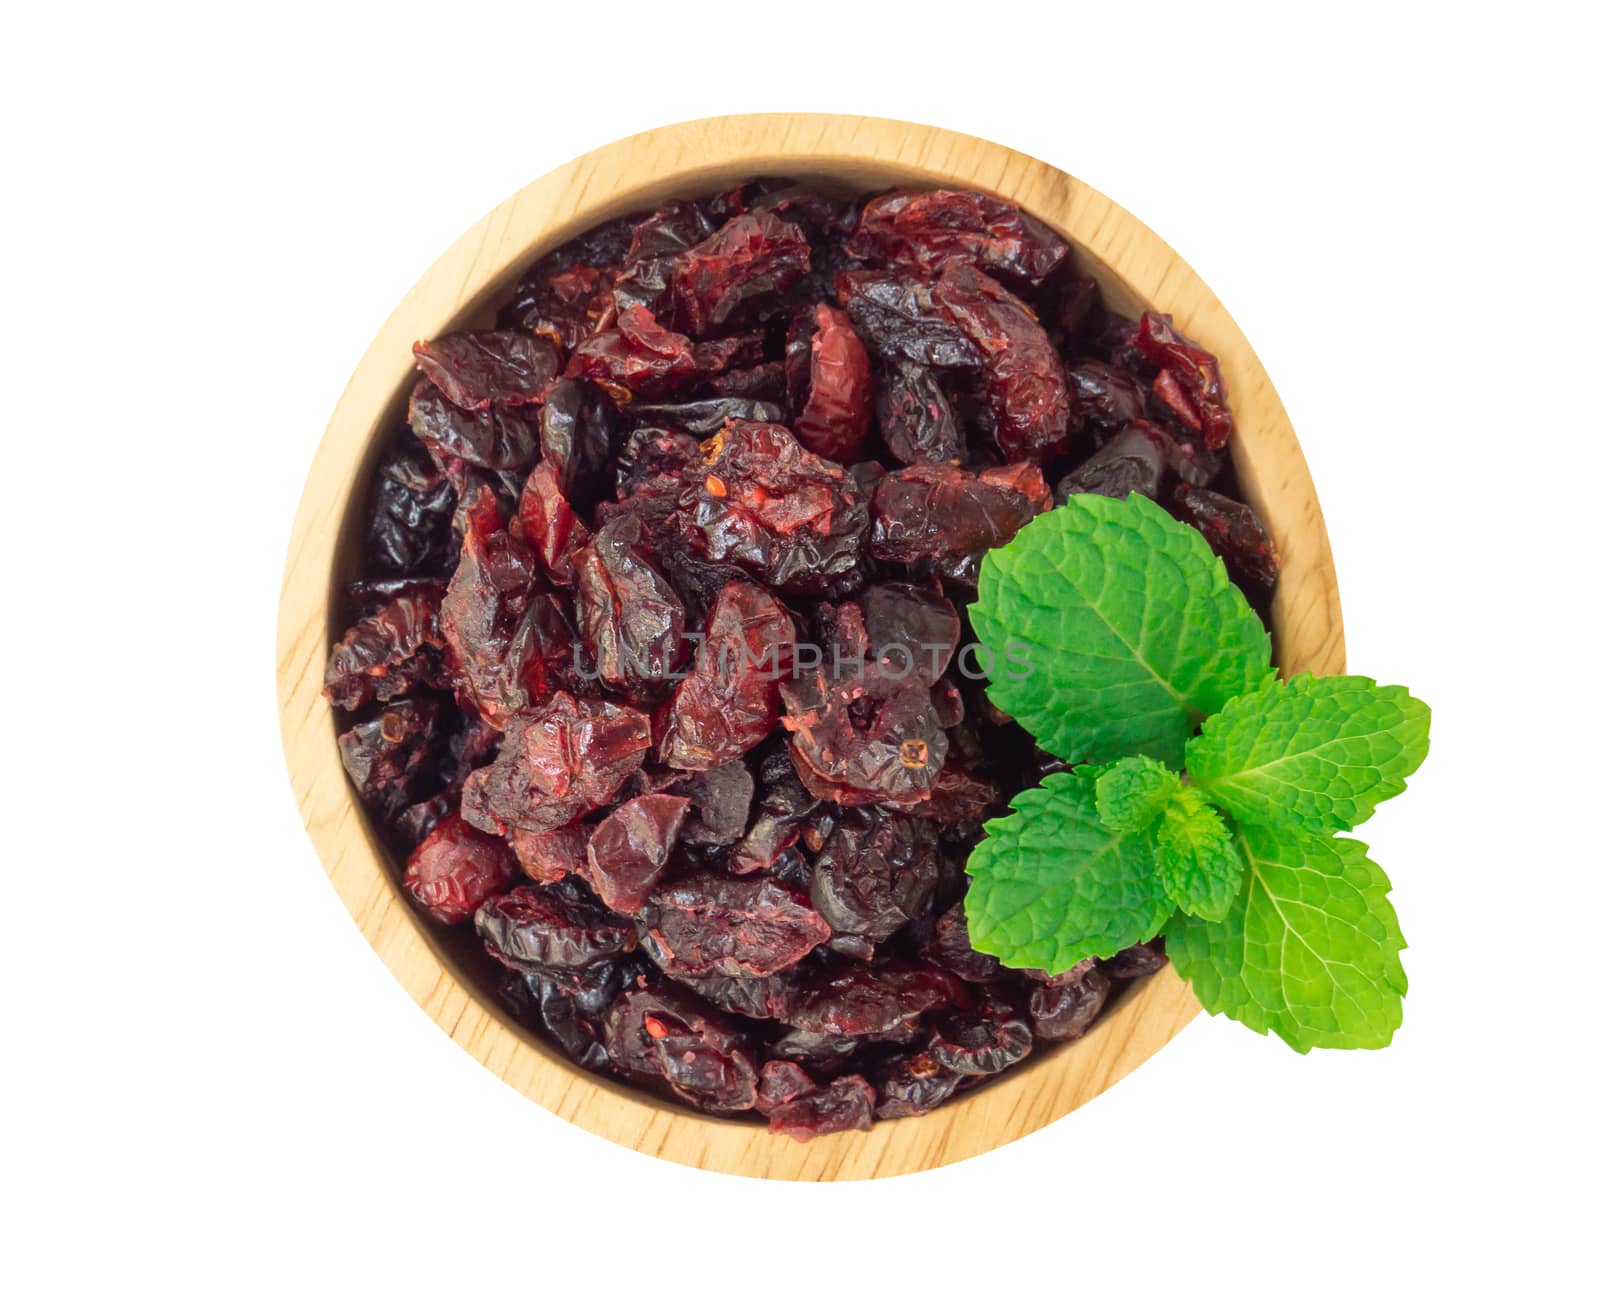 Dried canberry mix blueberry fruit in wood bowl isolated on whit by pt.pongsak@gmail.com